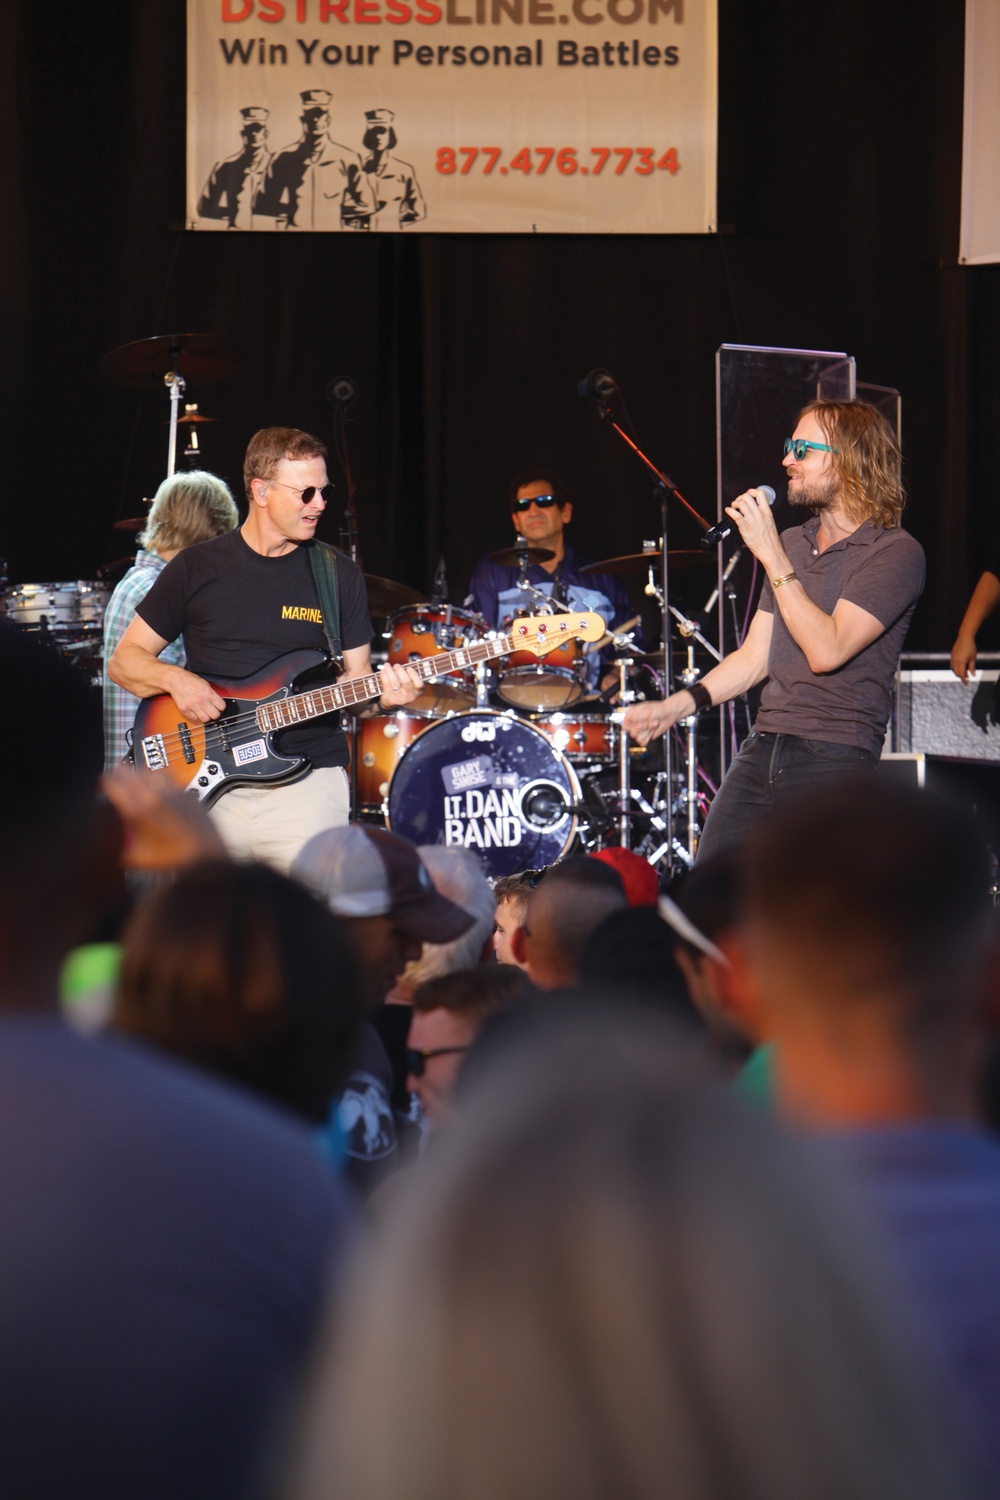 DVIDS News Gary Sinise, Lt Dan Band add flair to Fourth of July